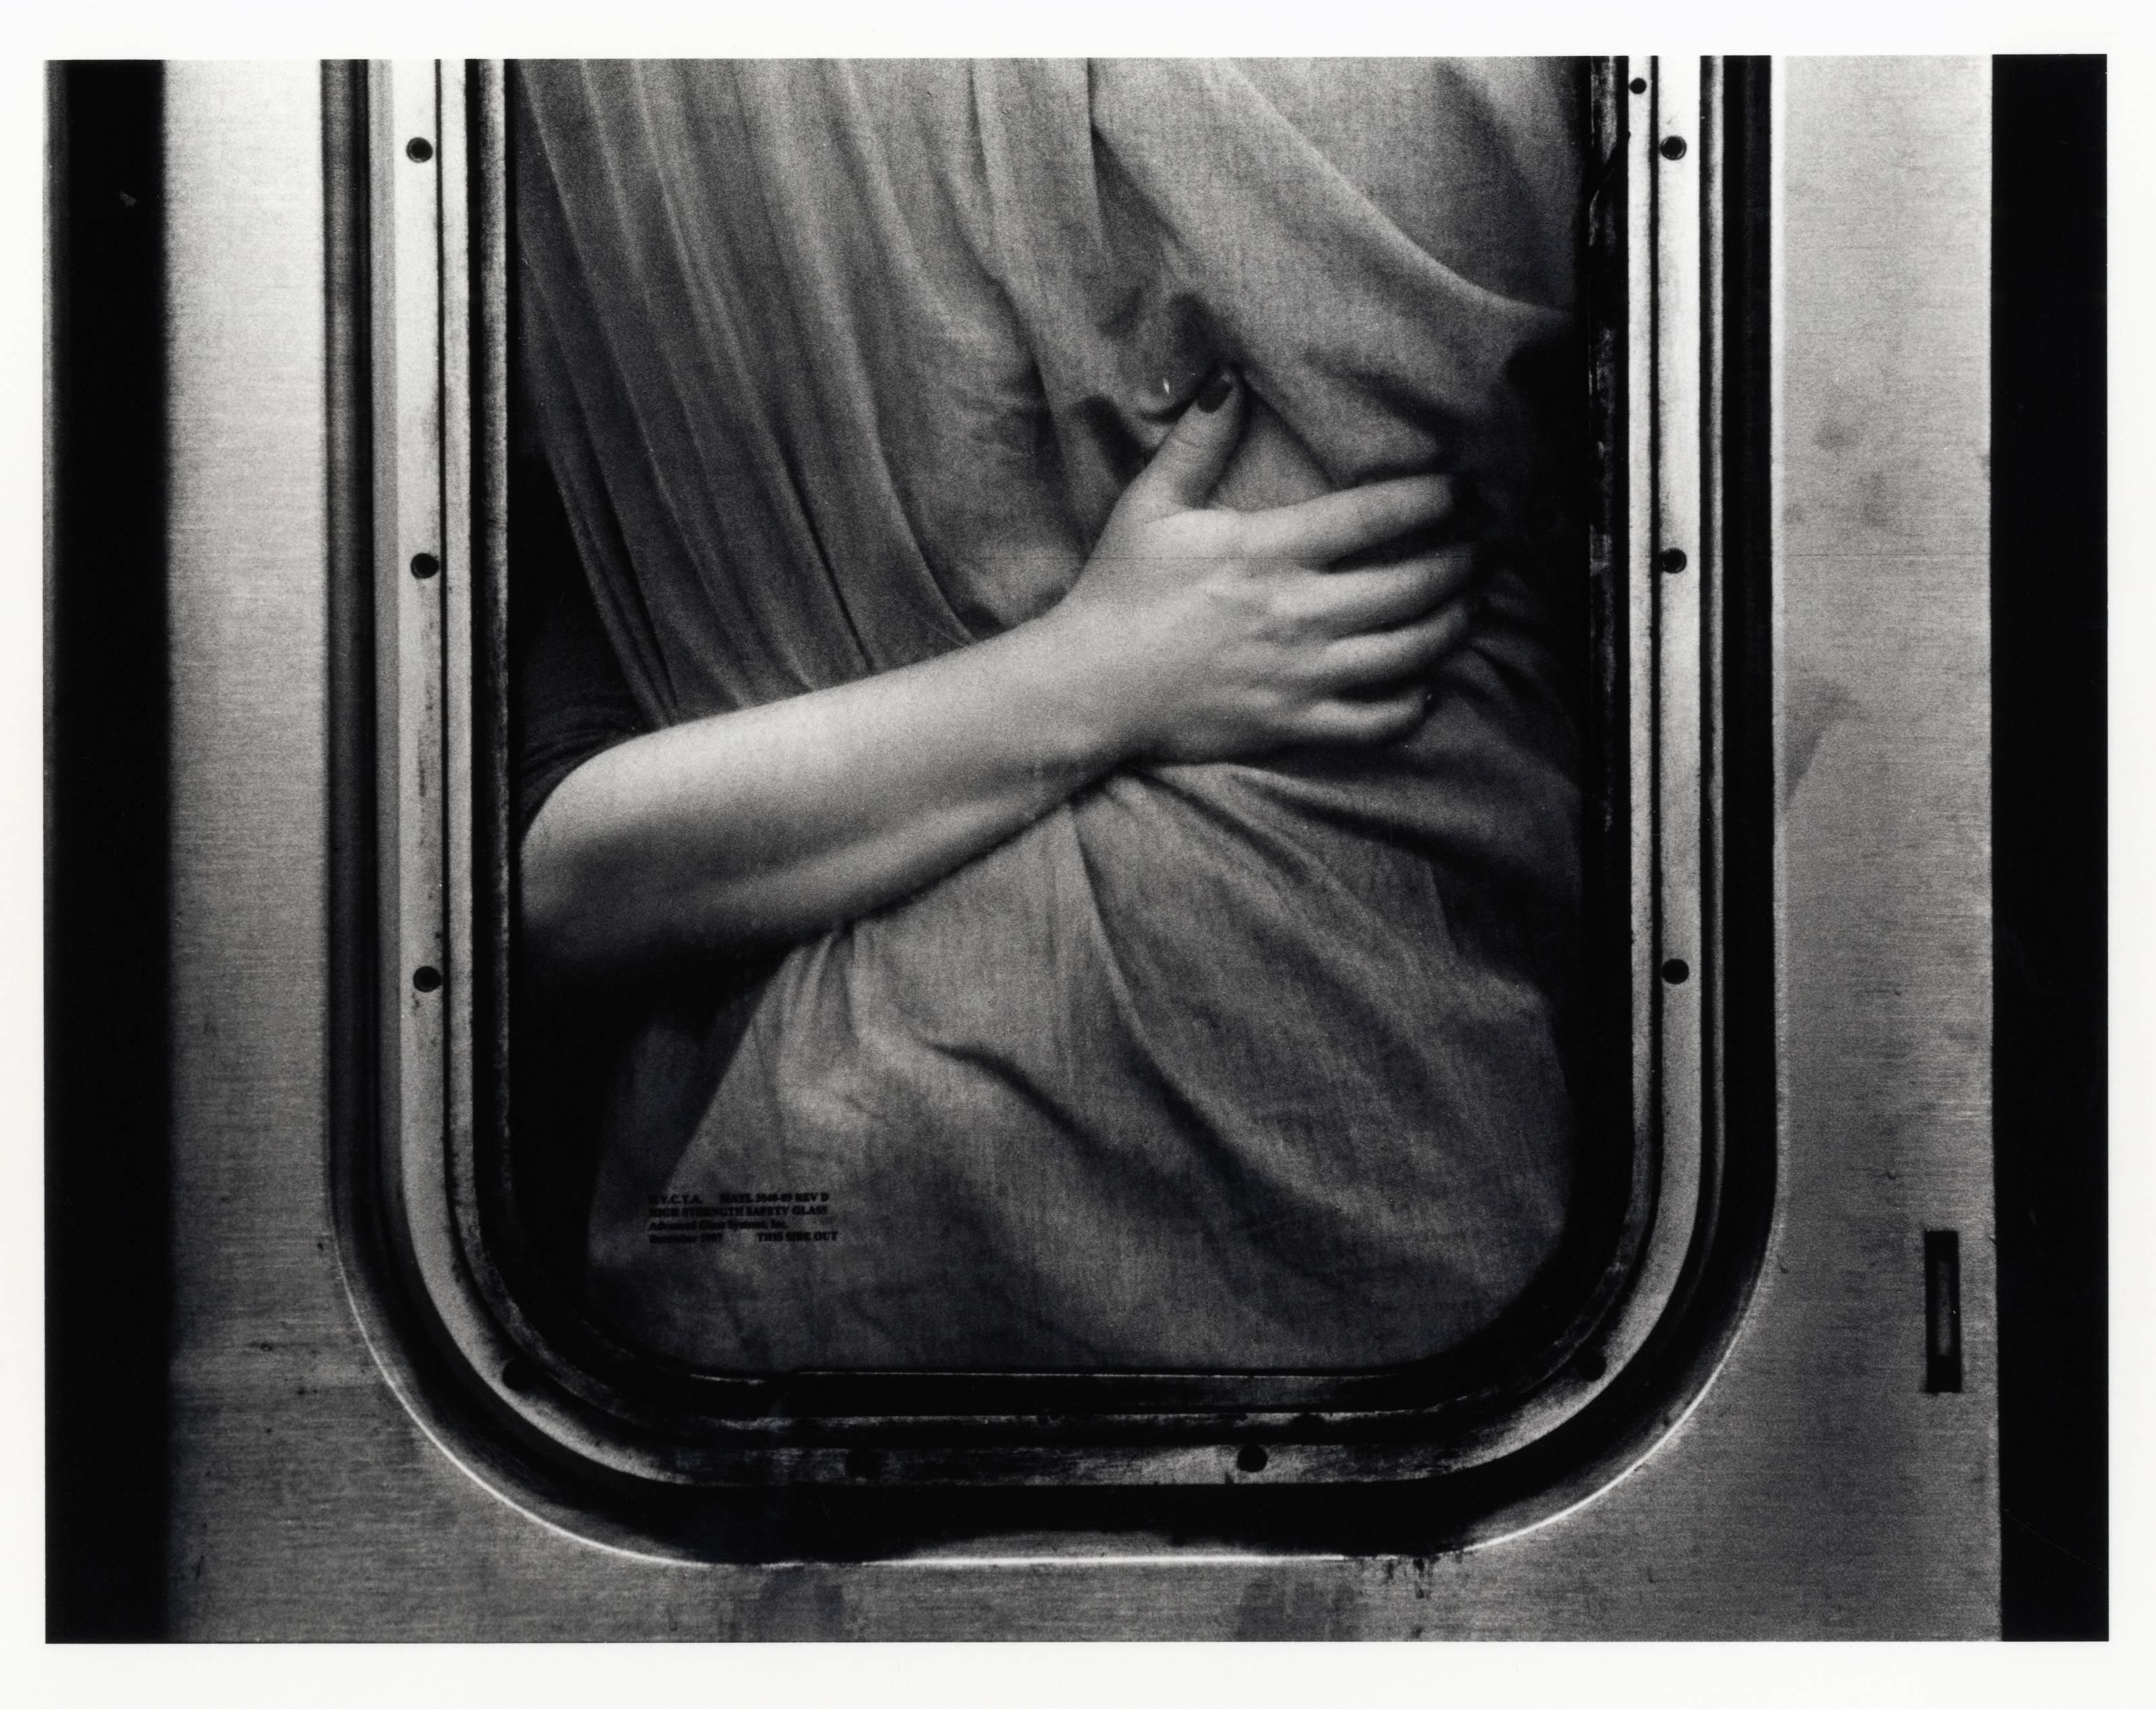 Kazuo Sumida Black and White Photograph - West 28th Street (from the series A Story of the New York  Subway)